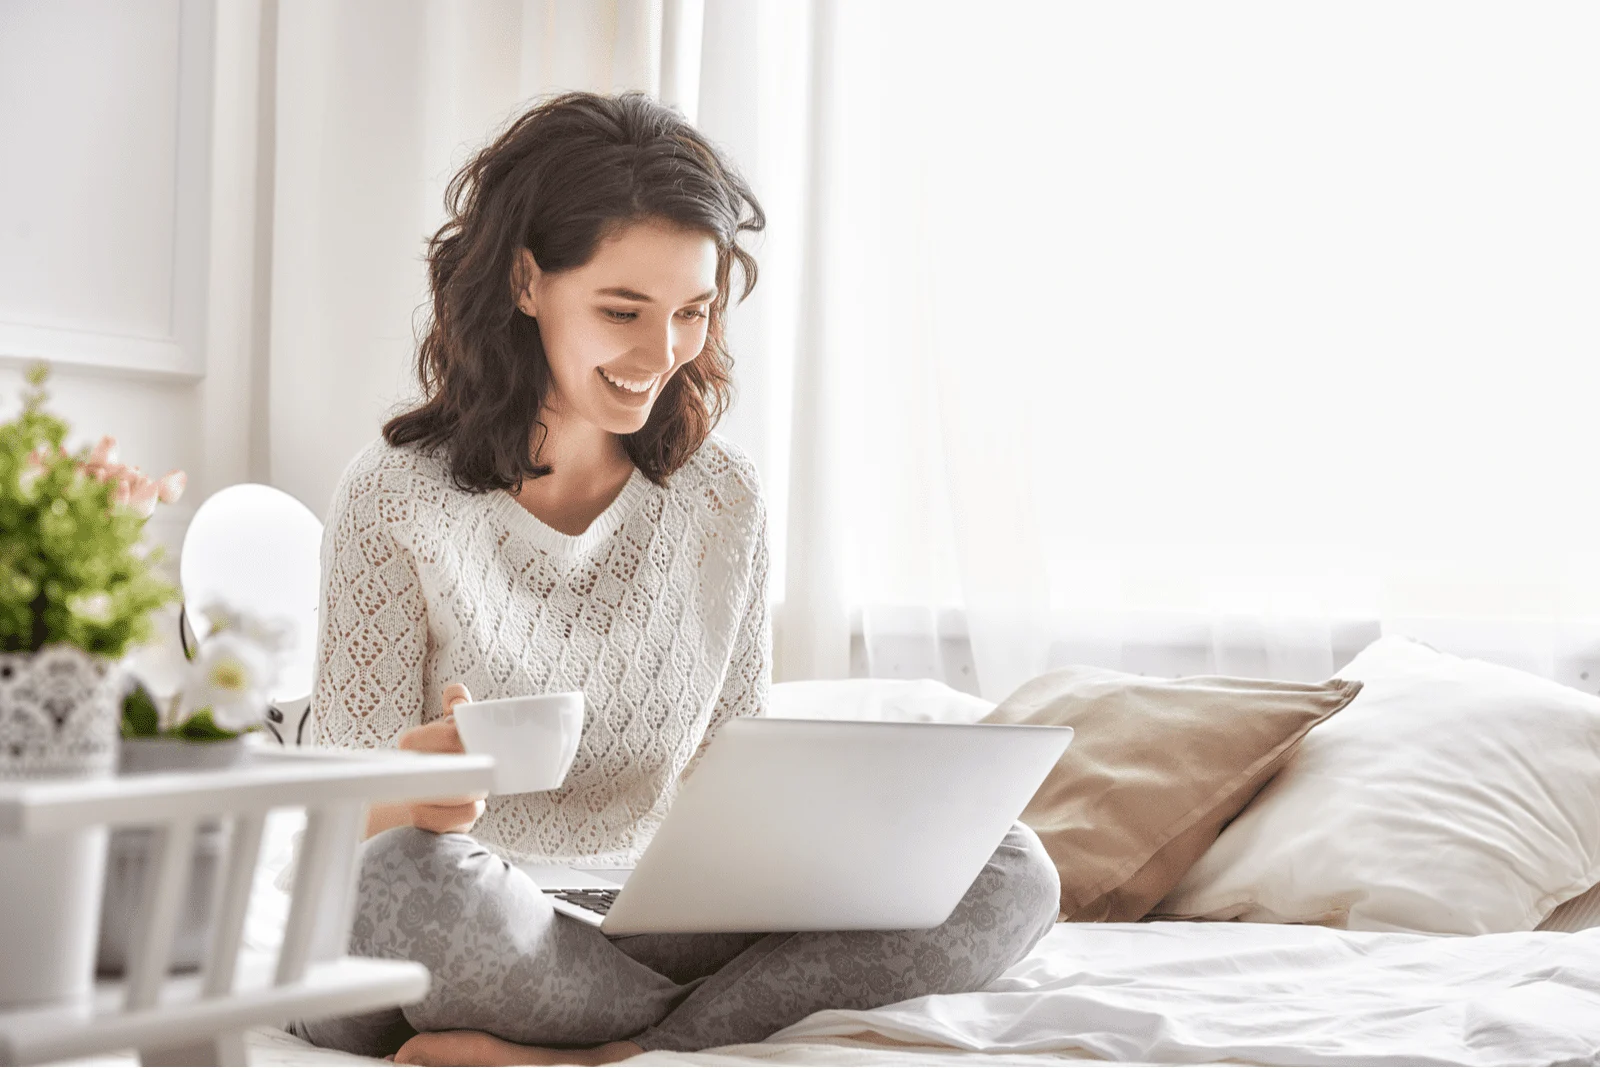 a smiling woman sits behind a laptop on the bed and holds a cup in her hand